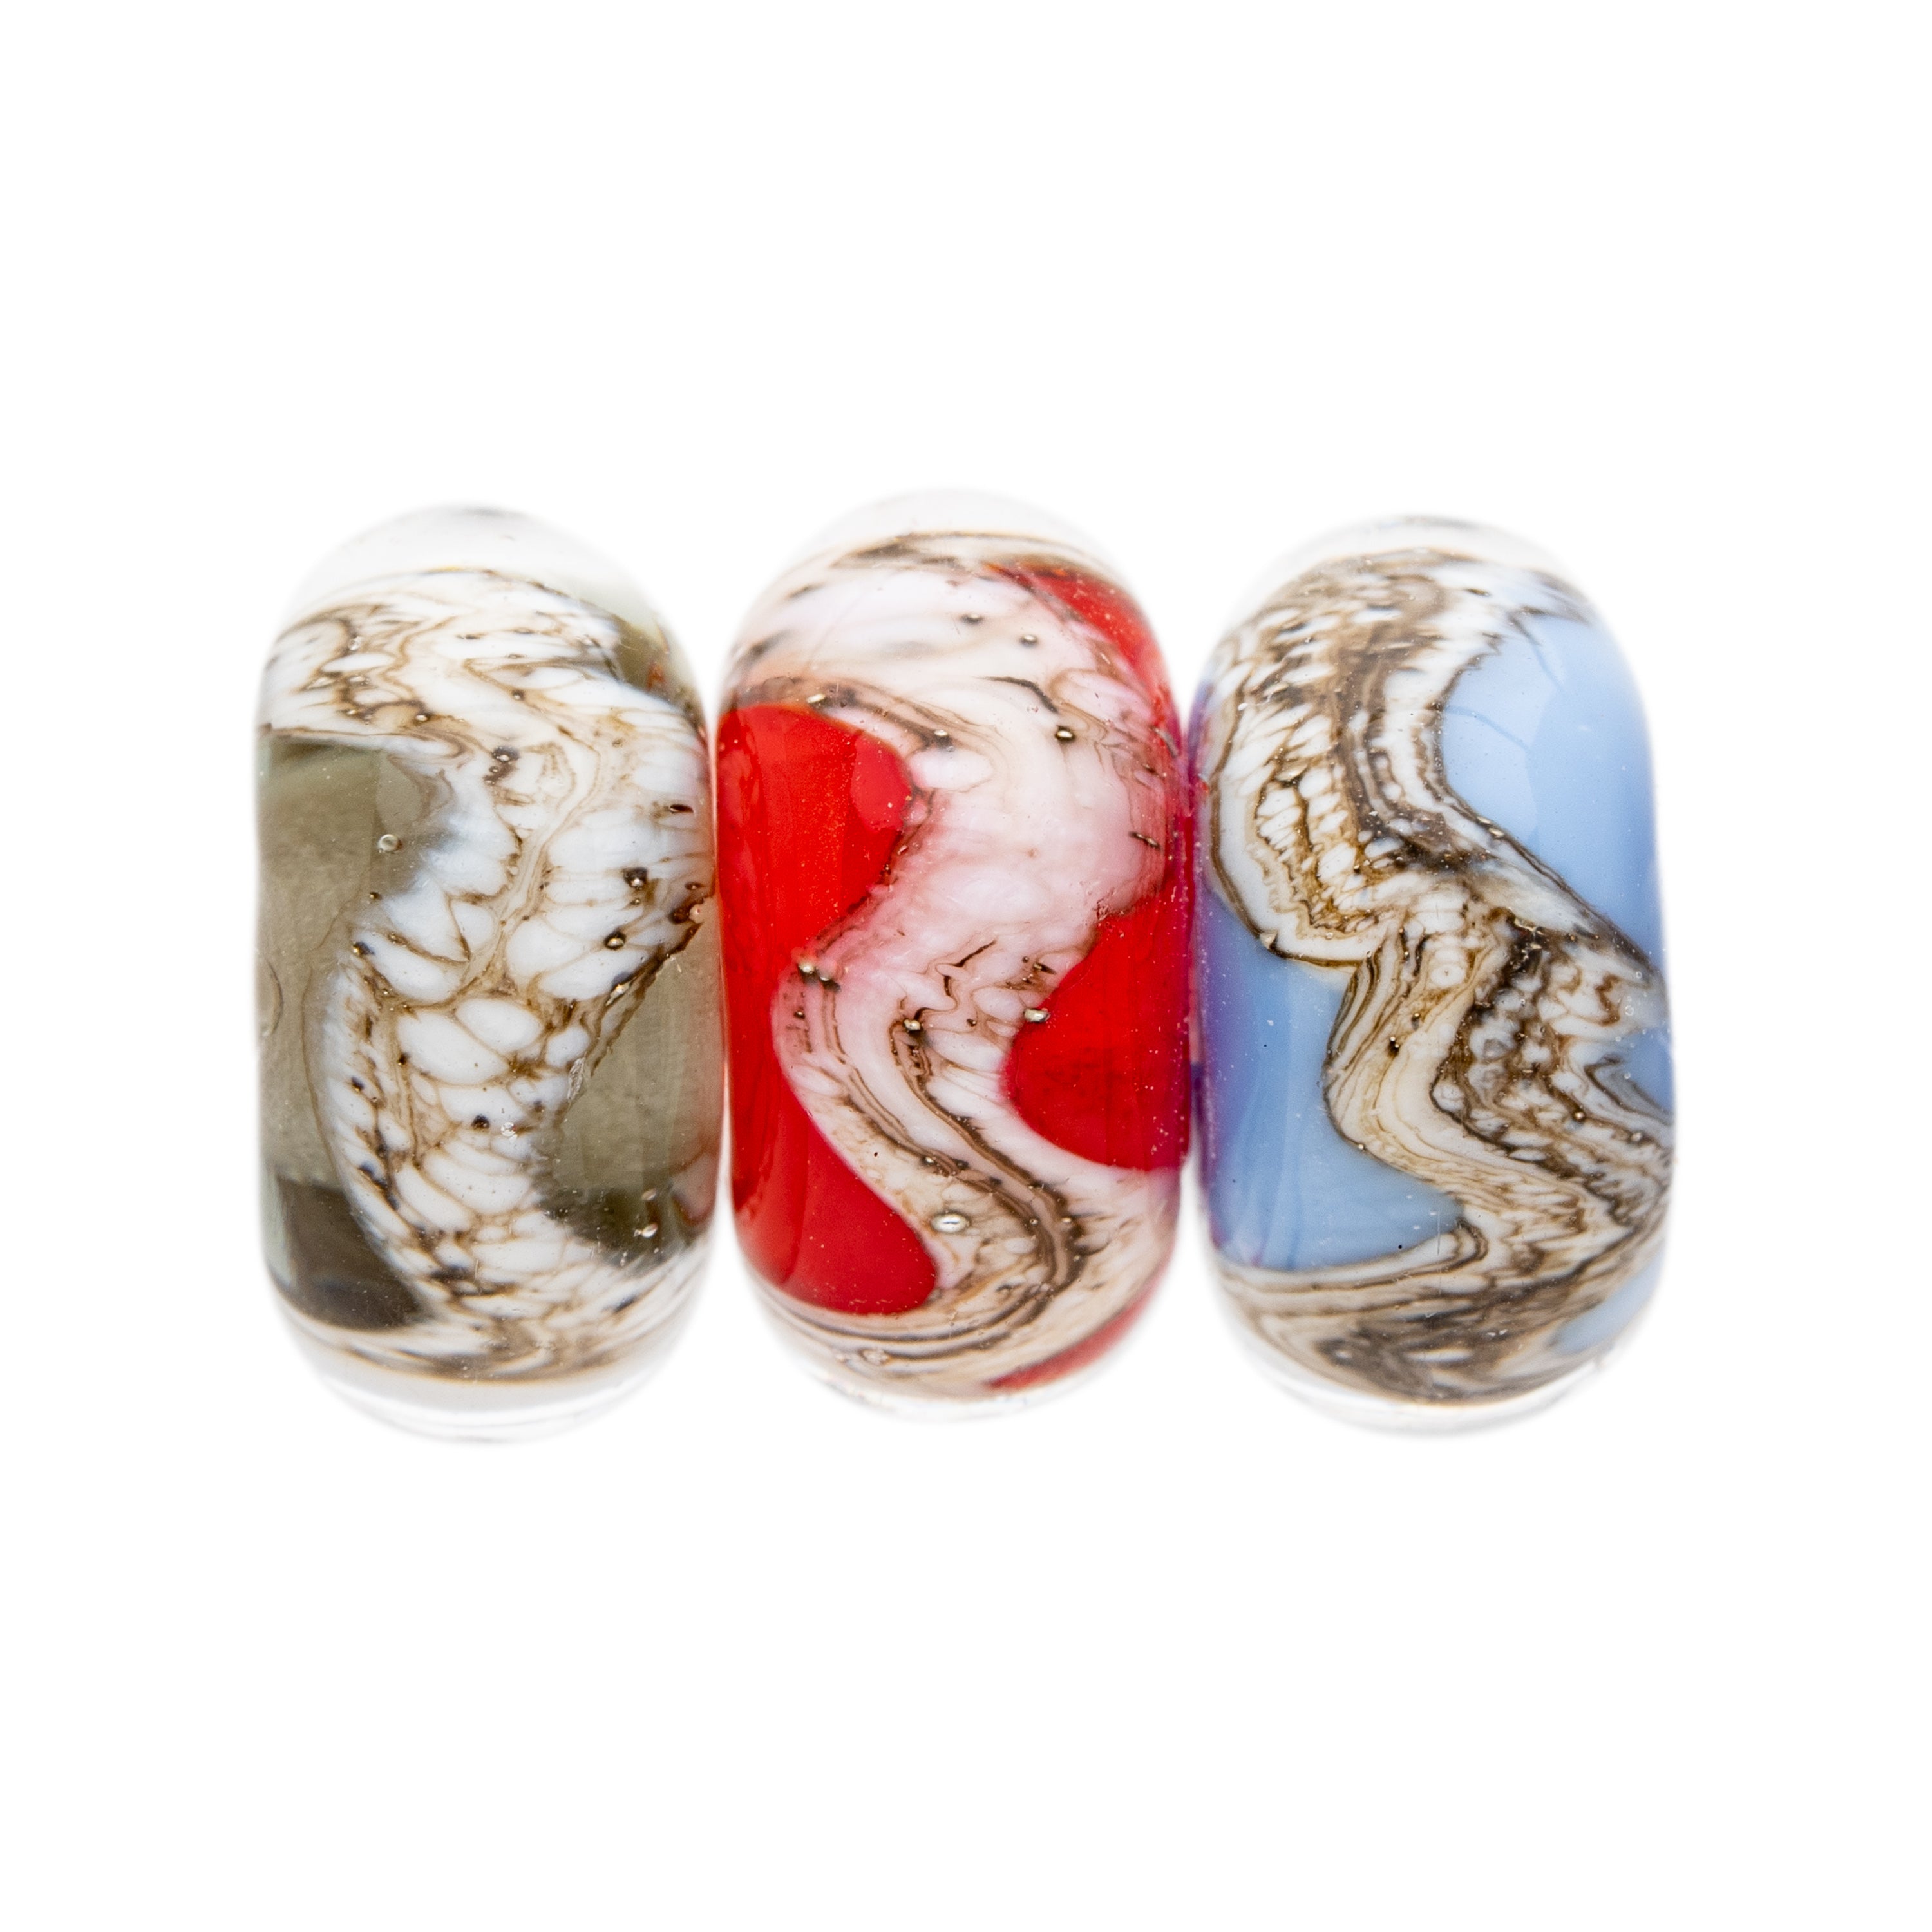 Grey, Red, blue glass beads wrapped with swirling silver sand pattern, representing the Yorkshire coastline.